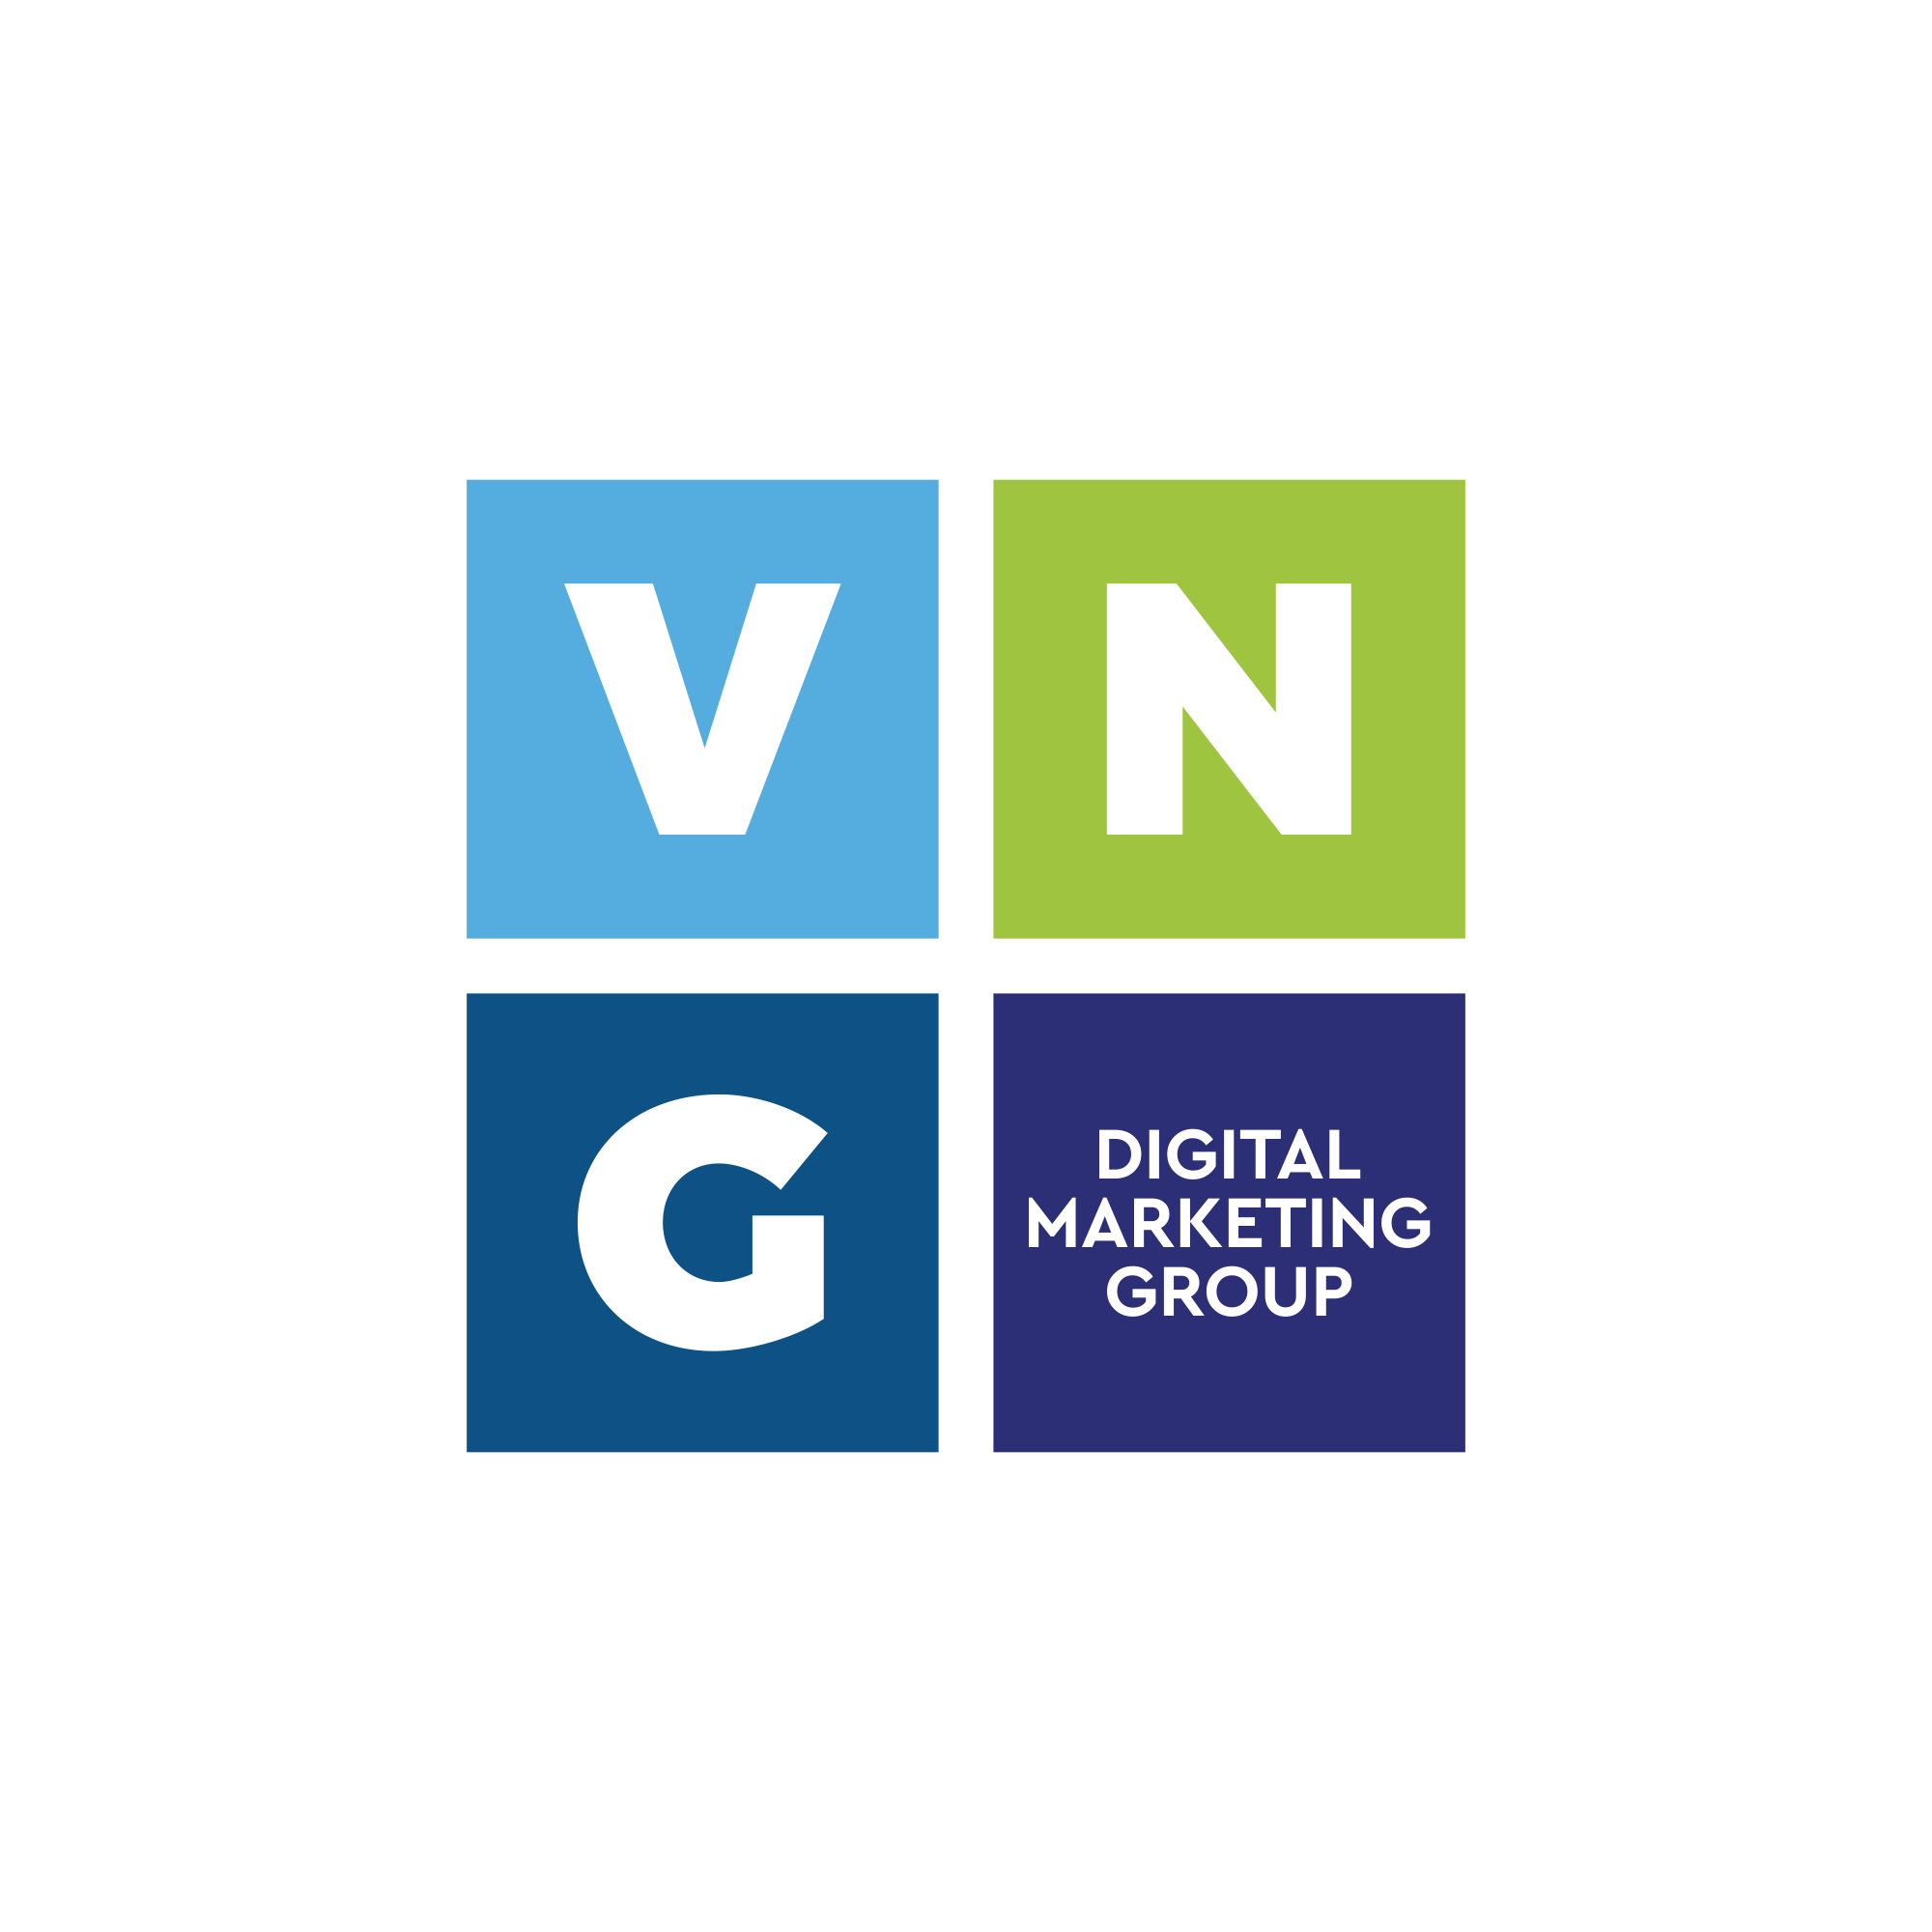 VNG Digital Marketing Group profile on Qualified.One